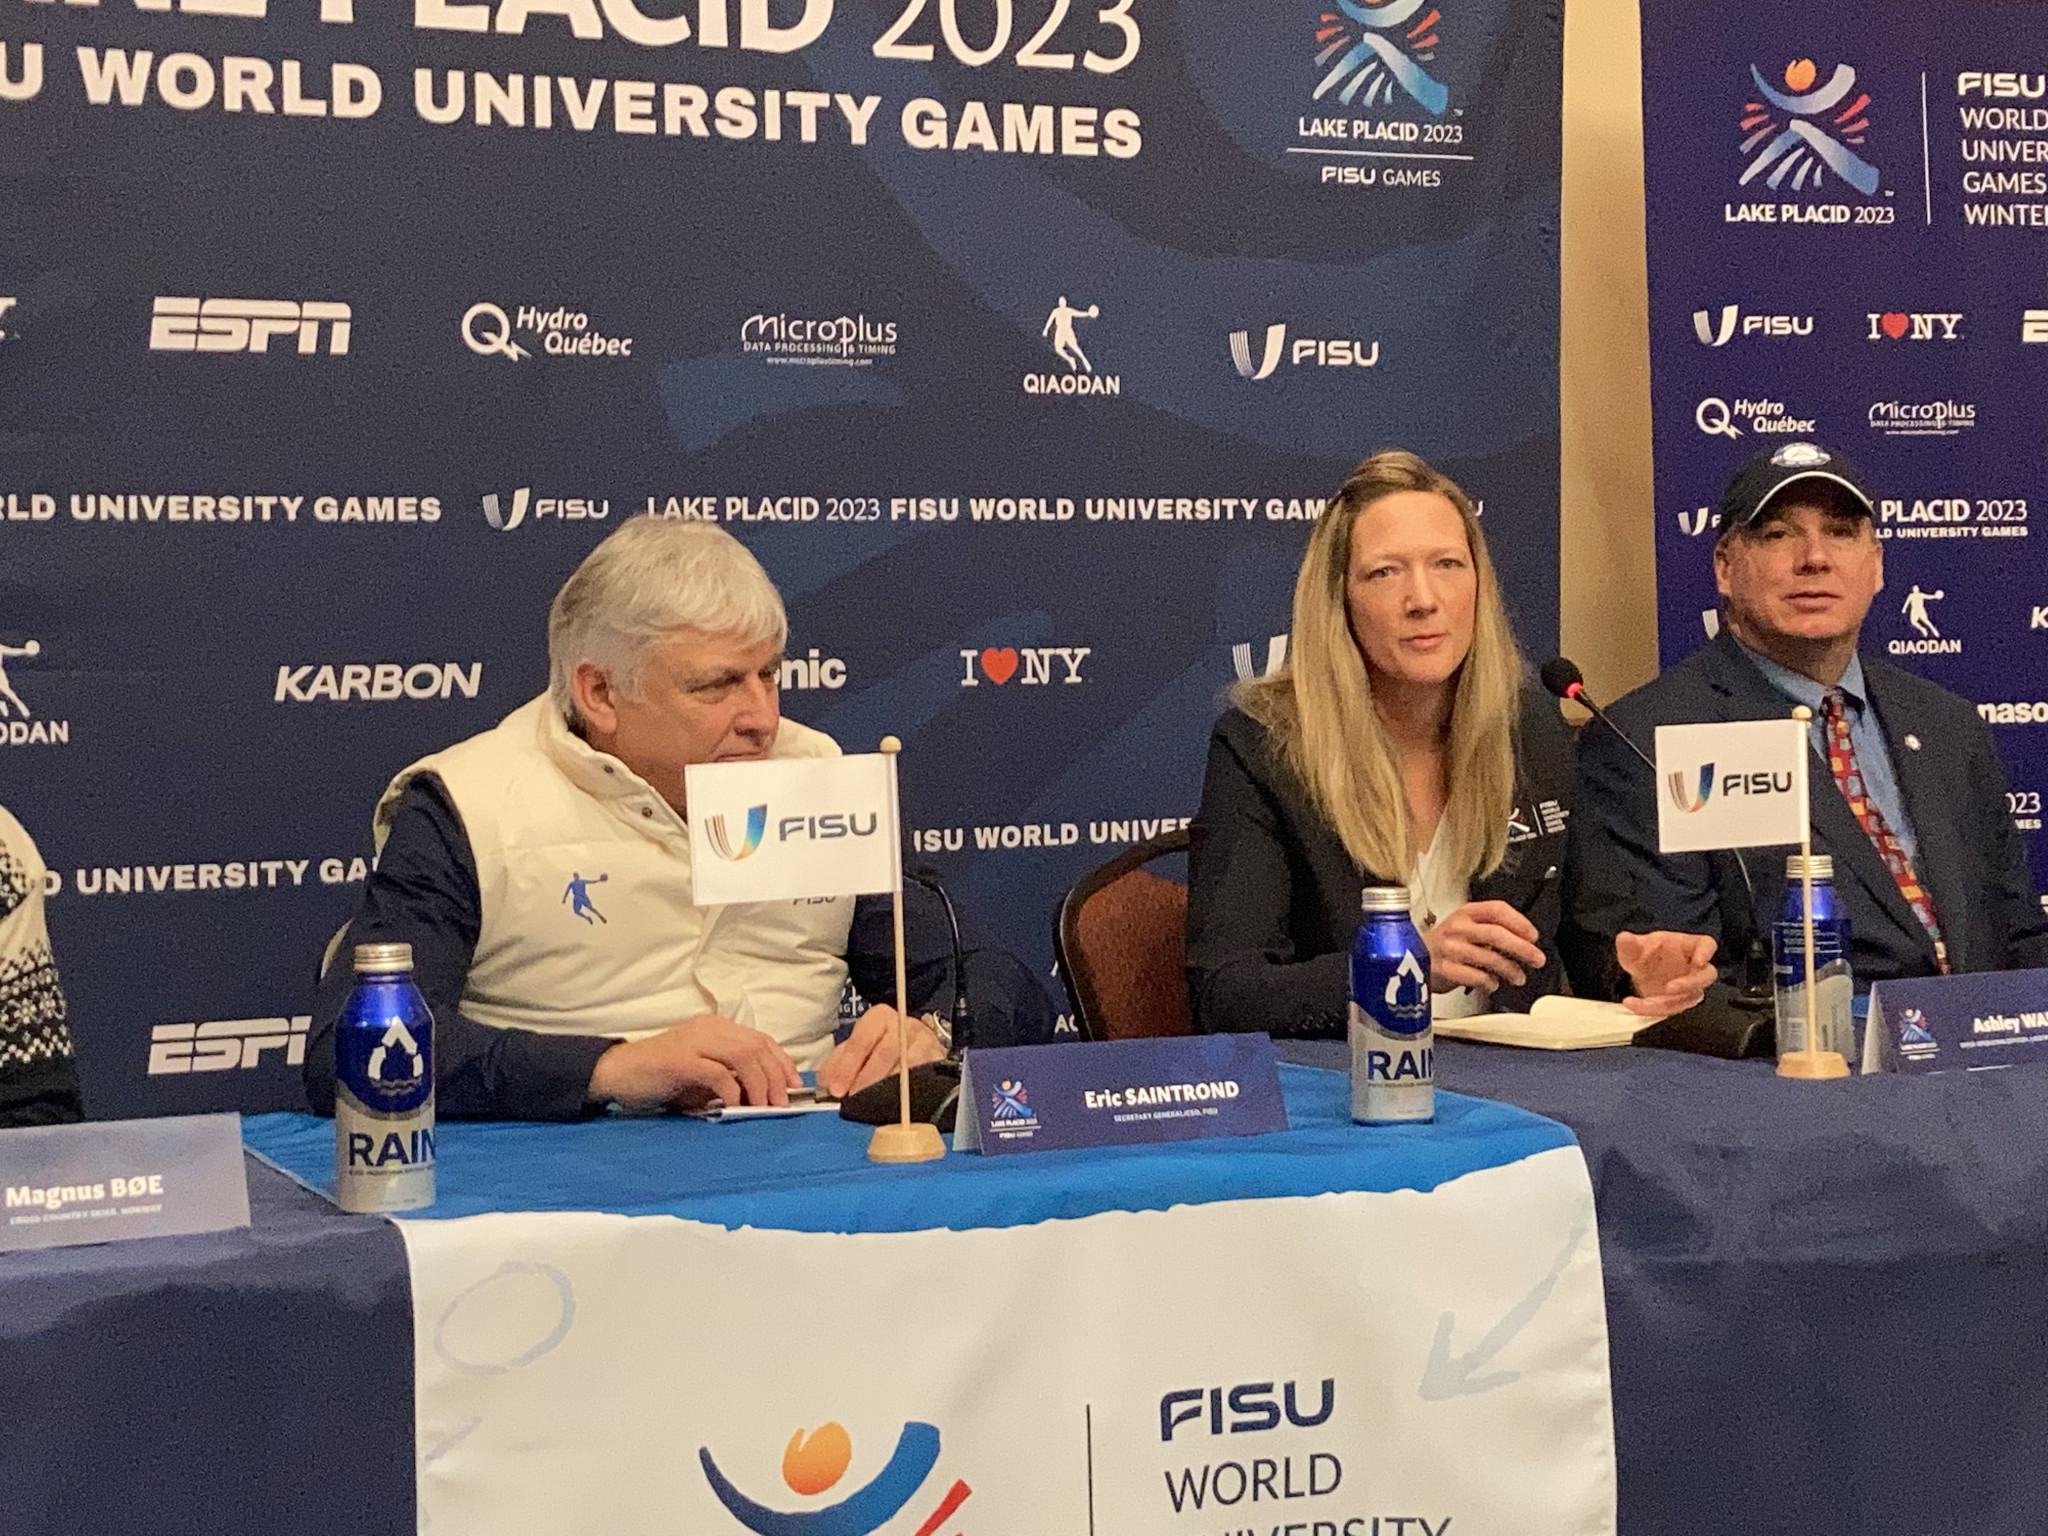 FISU and Lake Placid 2023 staged a press conference before the Opening Ceremony of the Winter World University Games where they updated the media on the arrival of the 46 delegations due to compete ©ITG